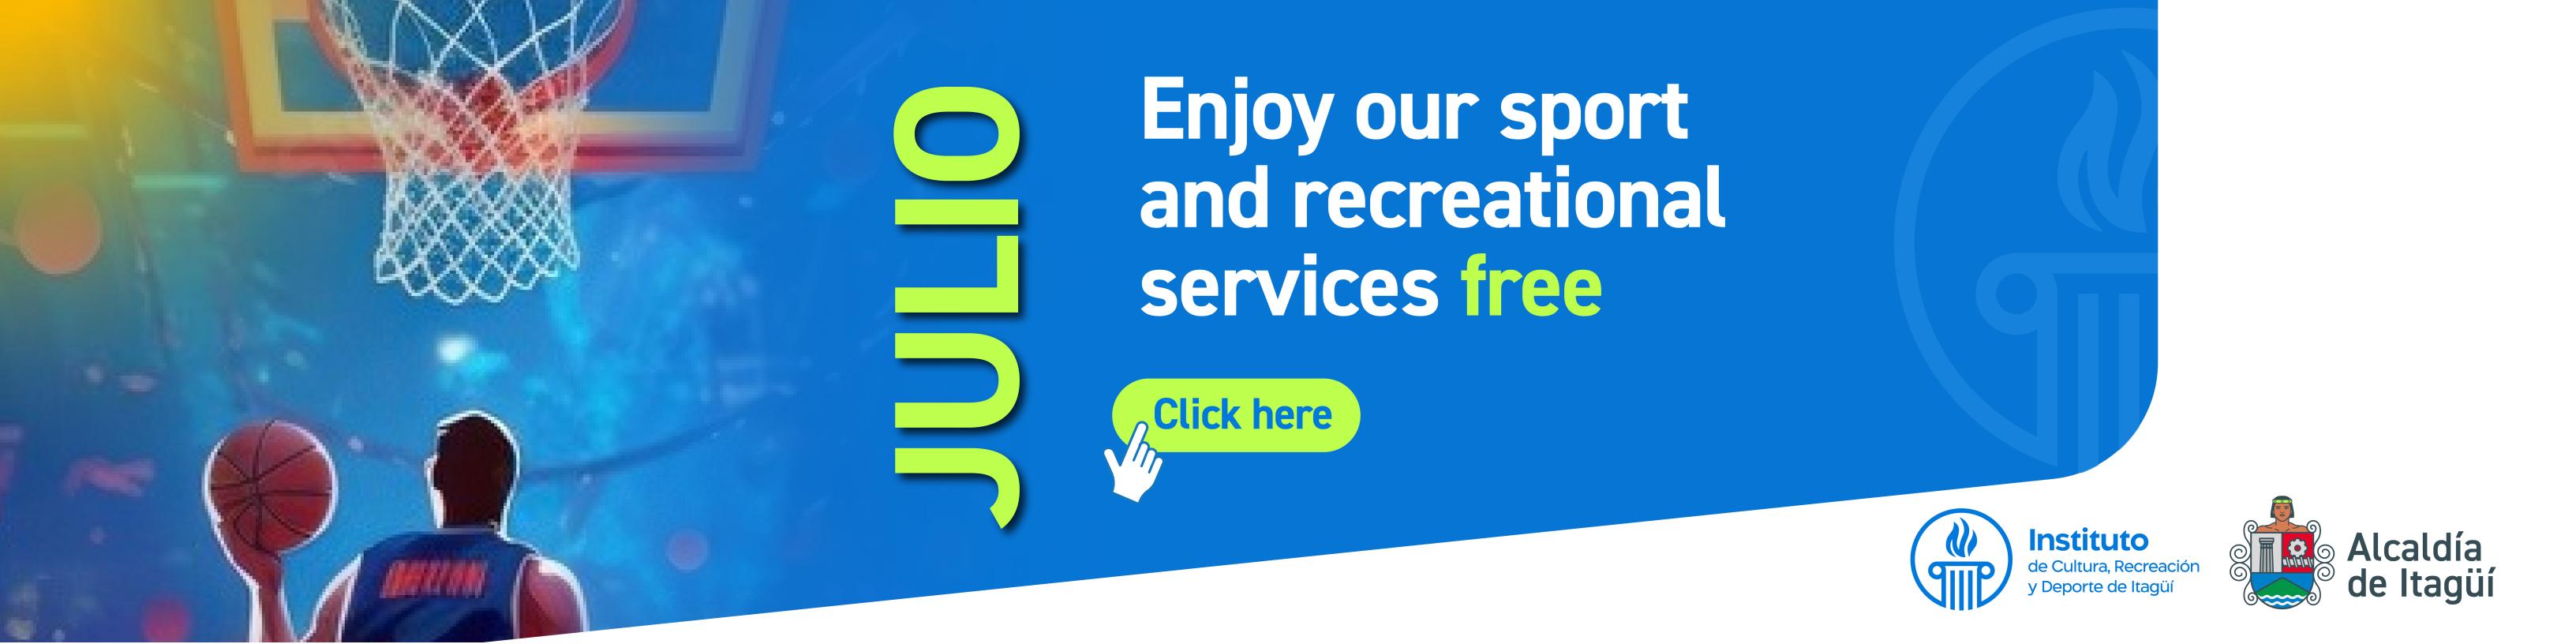 Enjoy our sport and recreational services free